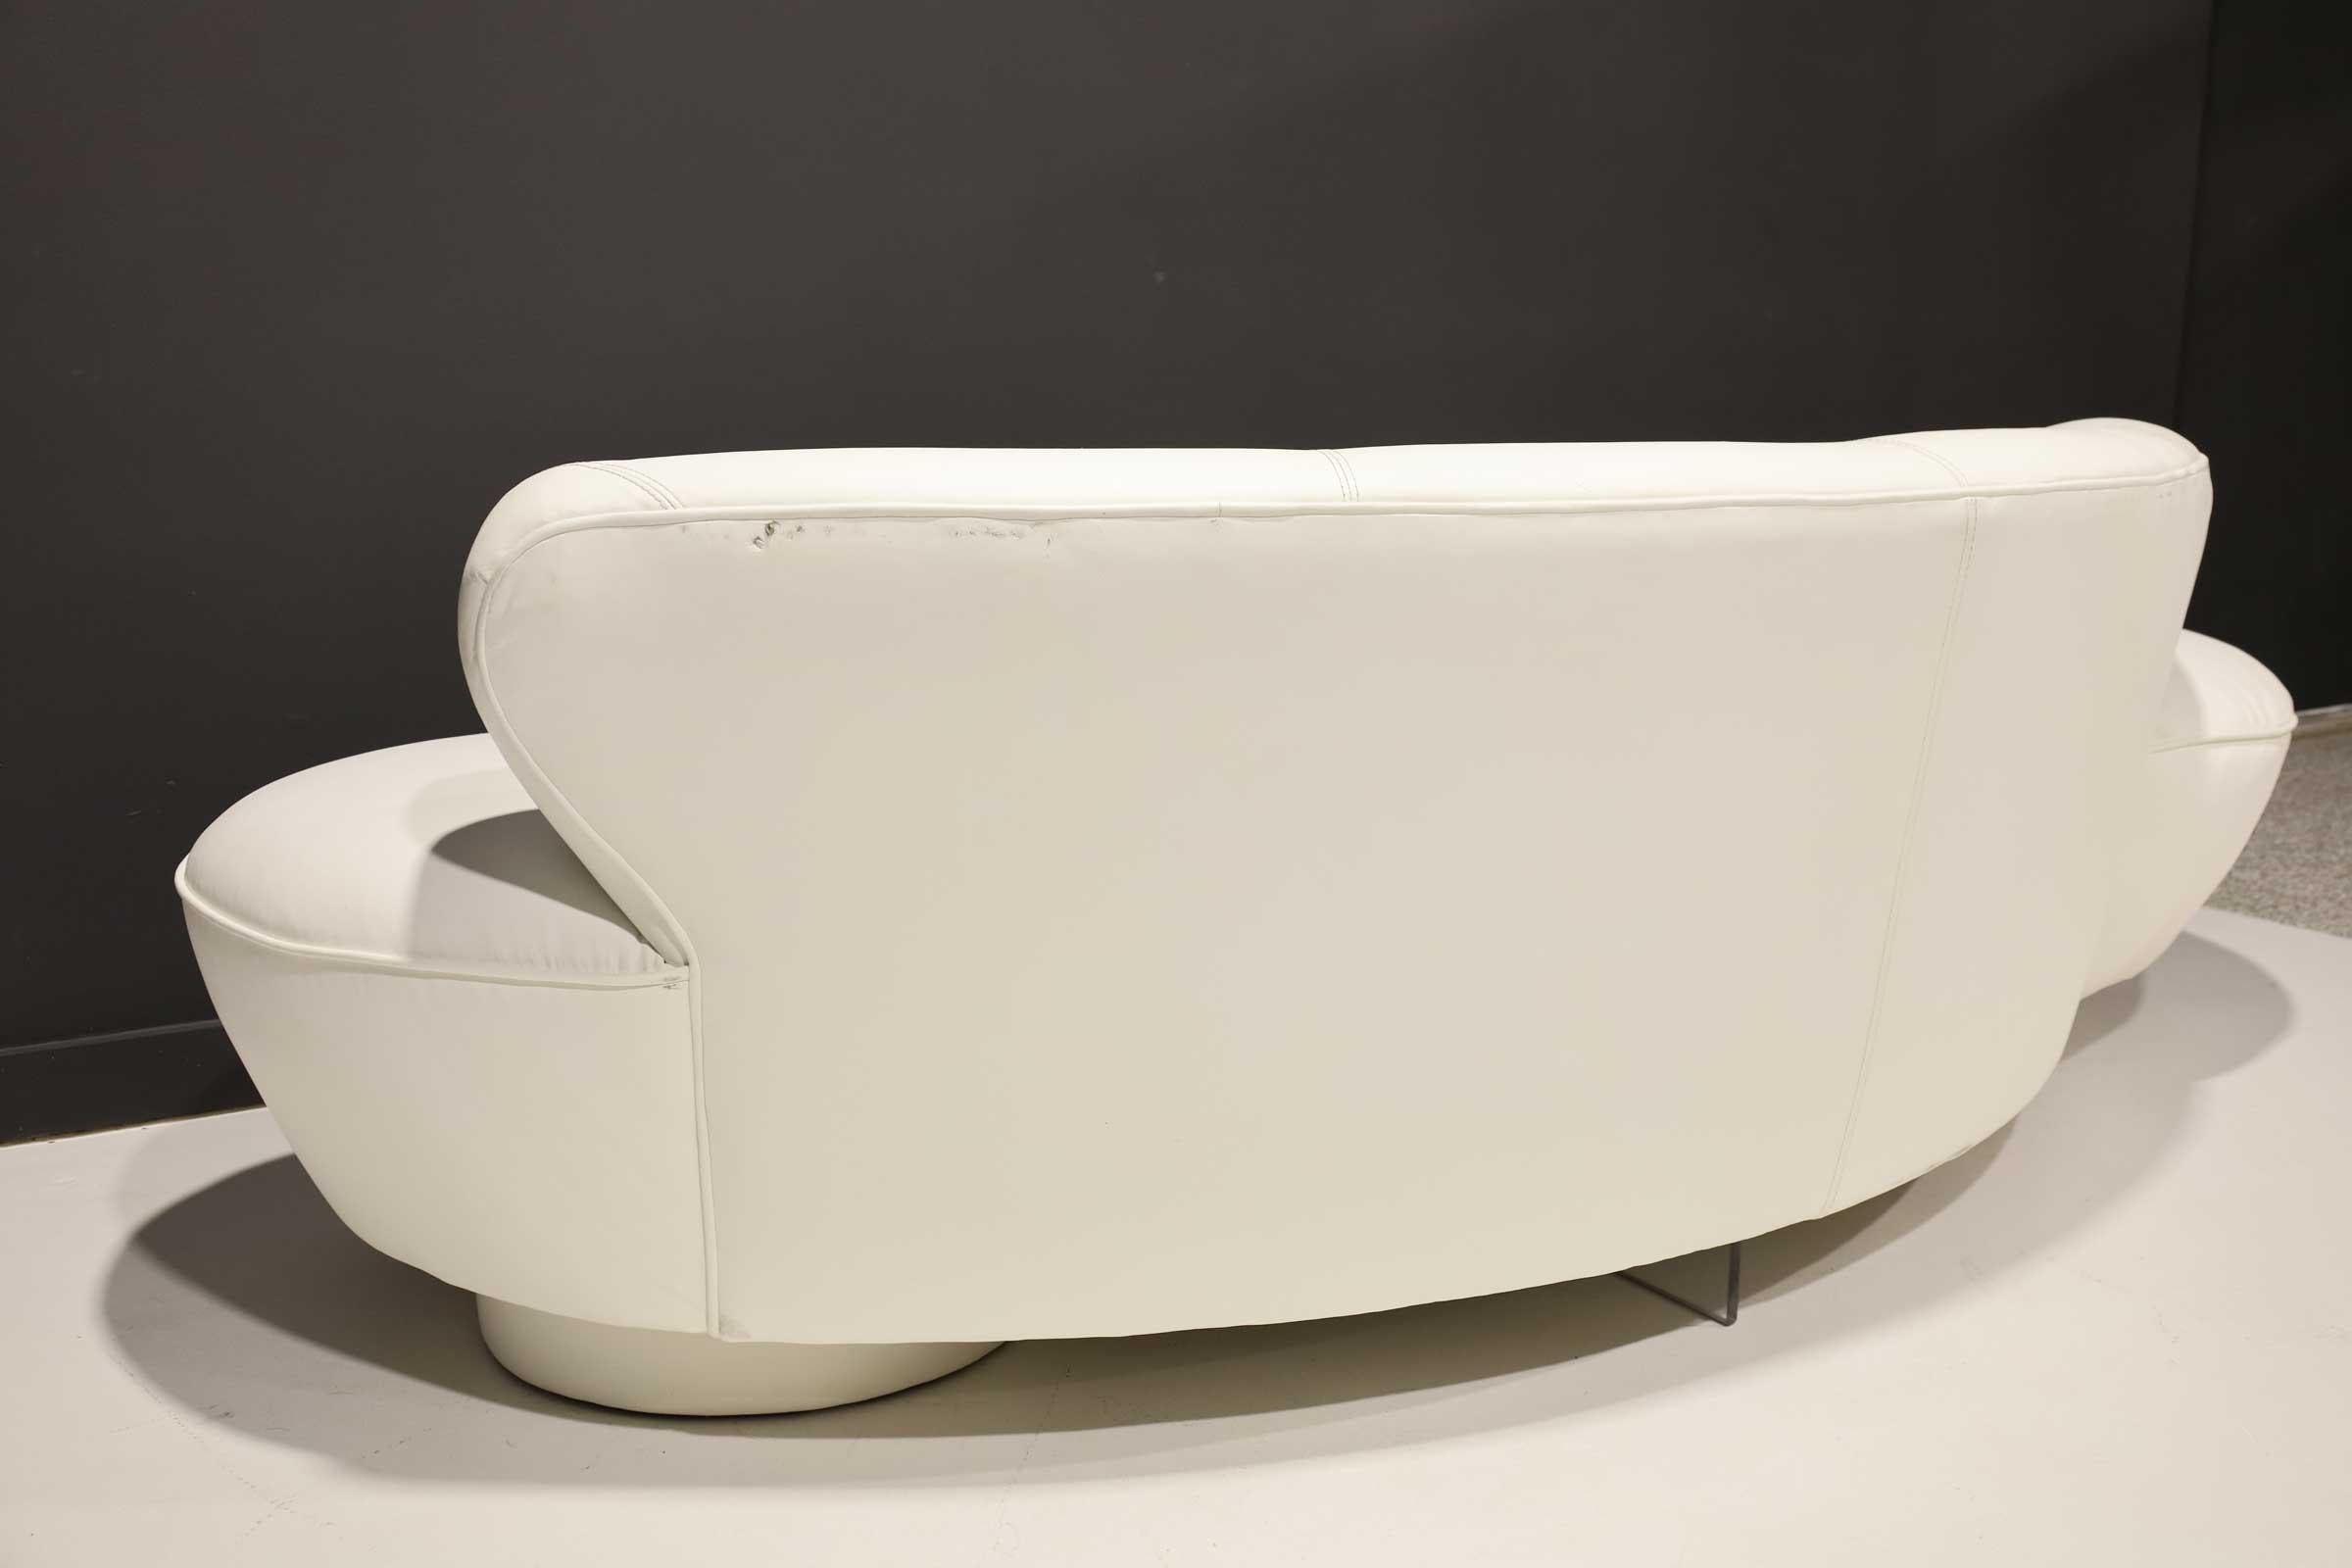 20th Century Vladimir Kagan Cloud Serpentine Sofa by Directional in White Leather